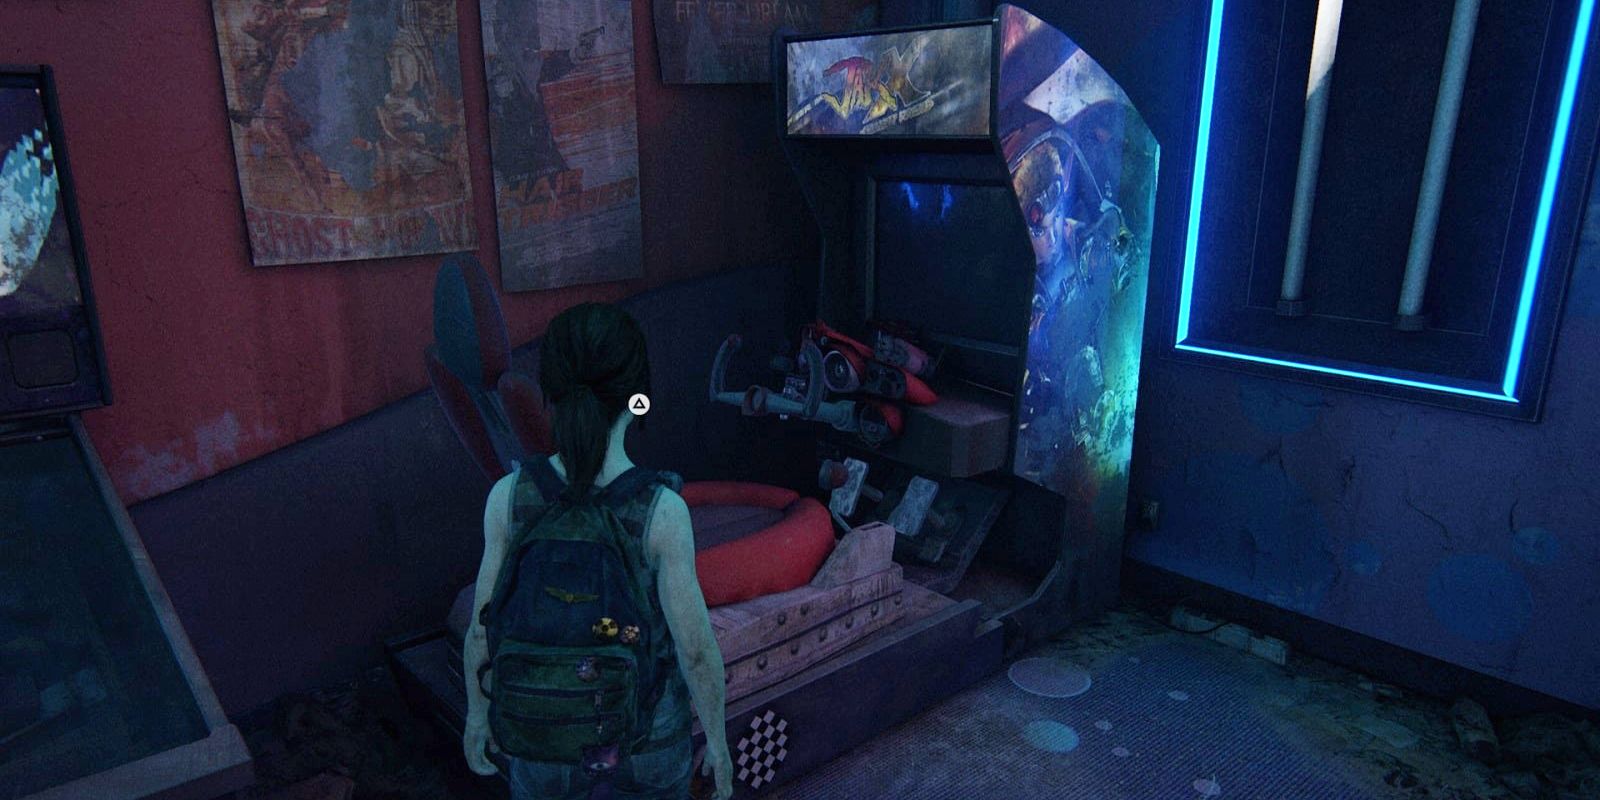 Ellie approaching the Jak X Combat Racing arcade cabinet in The Last of Us: Left Behind.